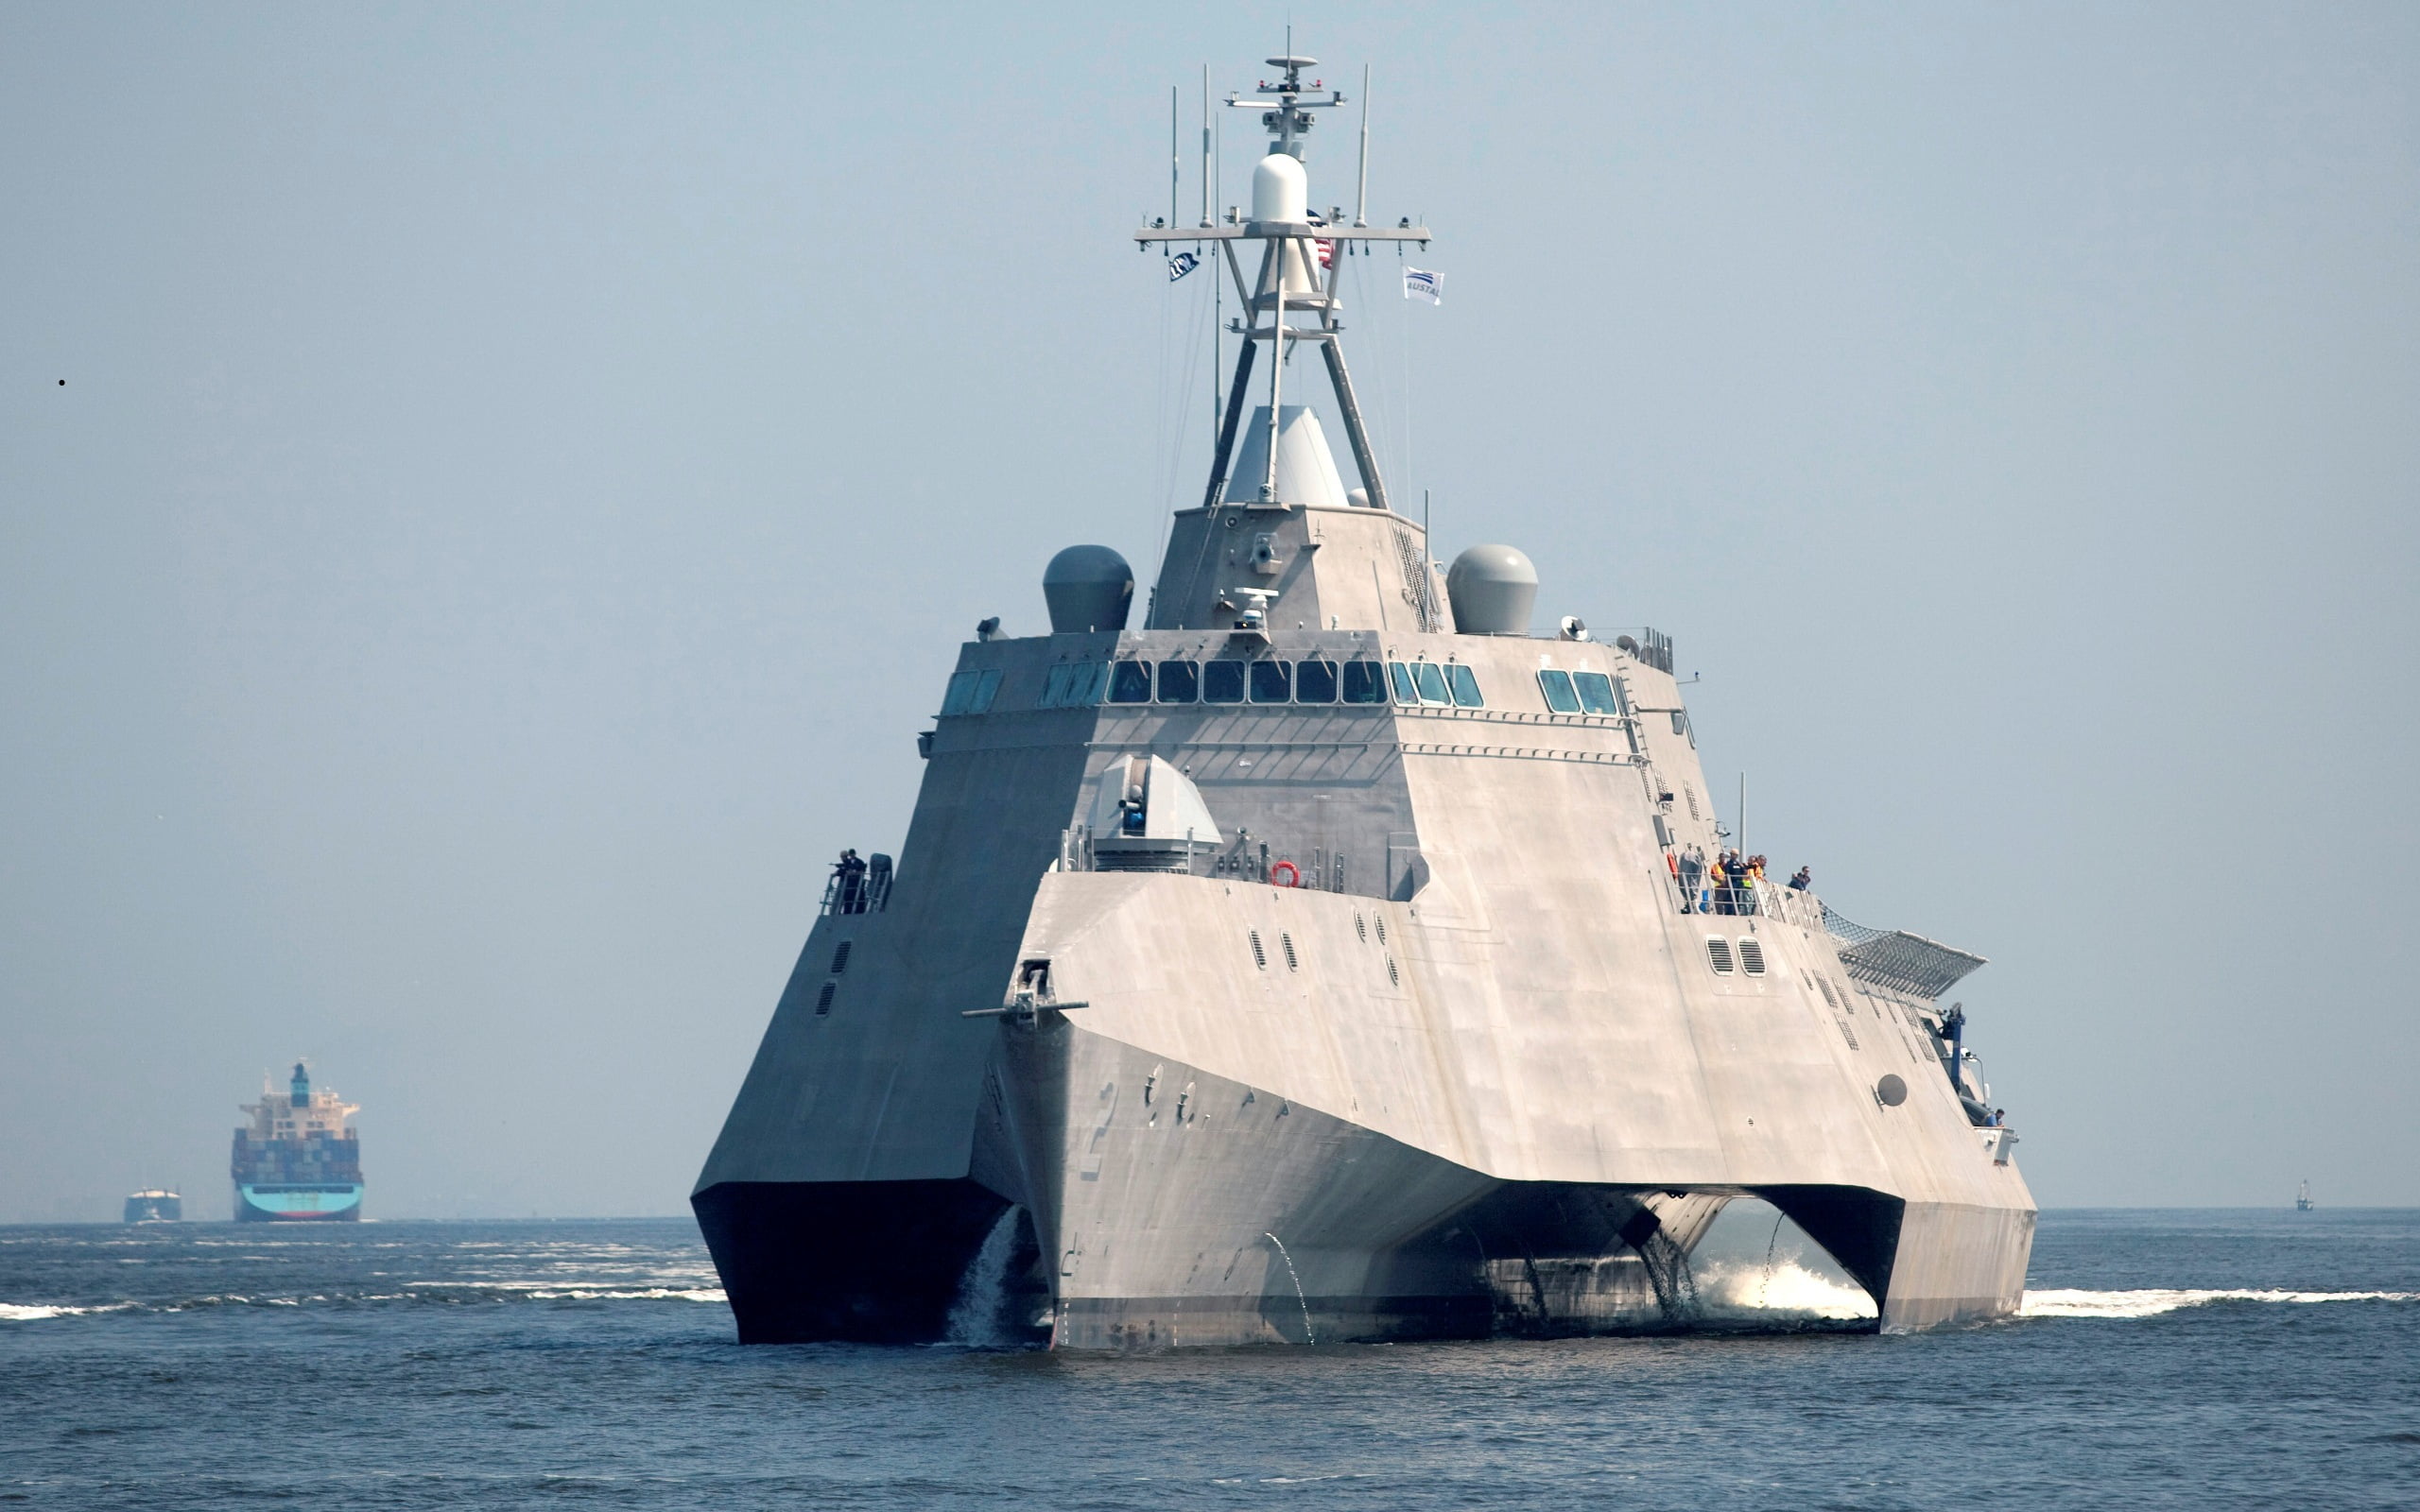 USA, Combat, Independence, The ship&quot;LCS&quot;